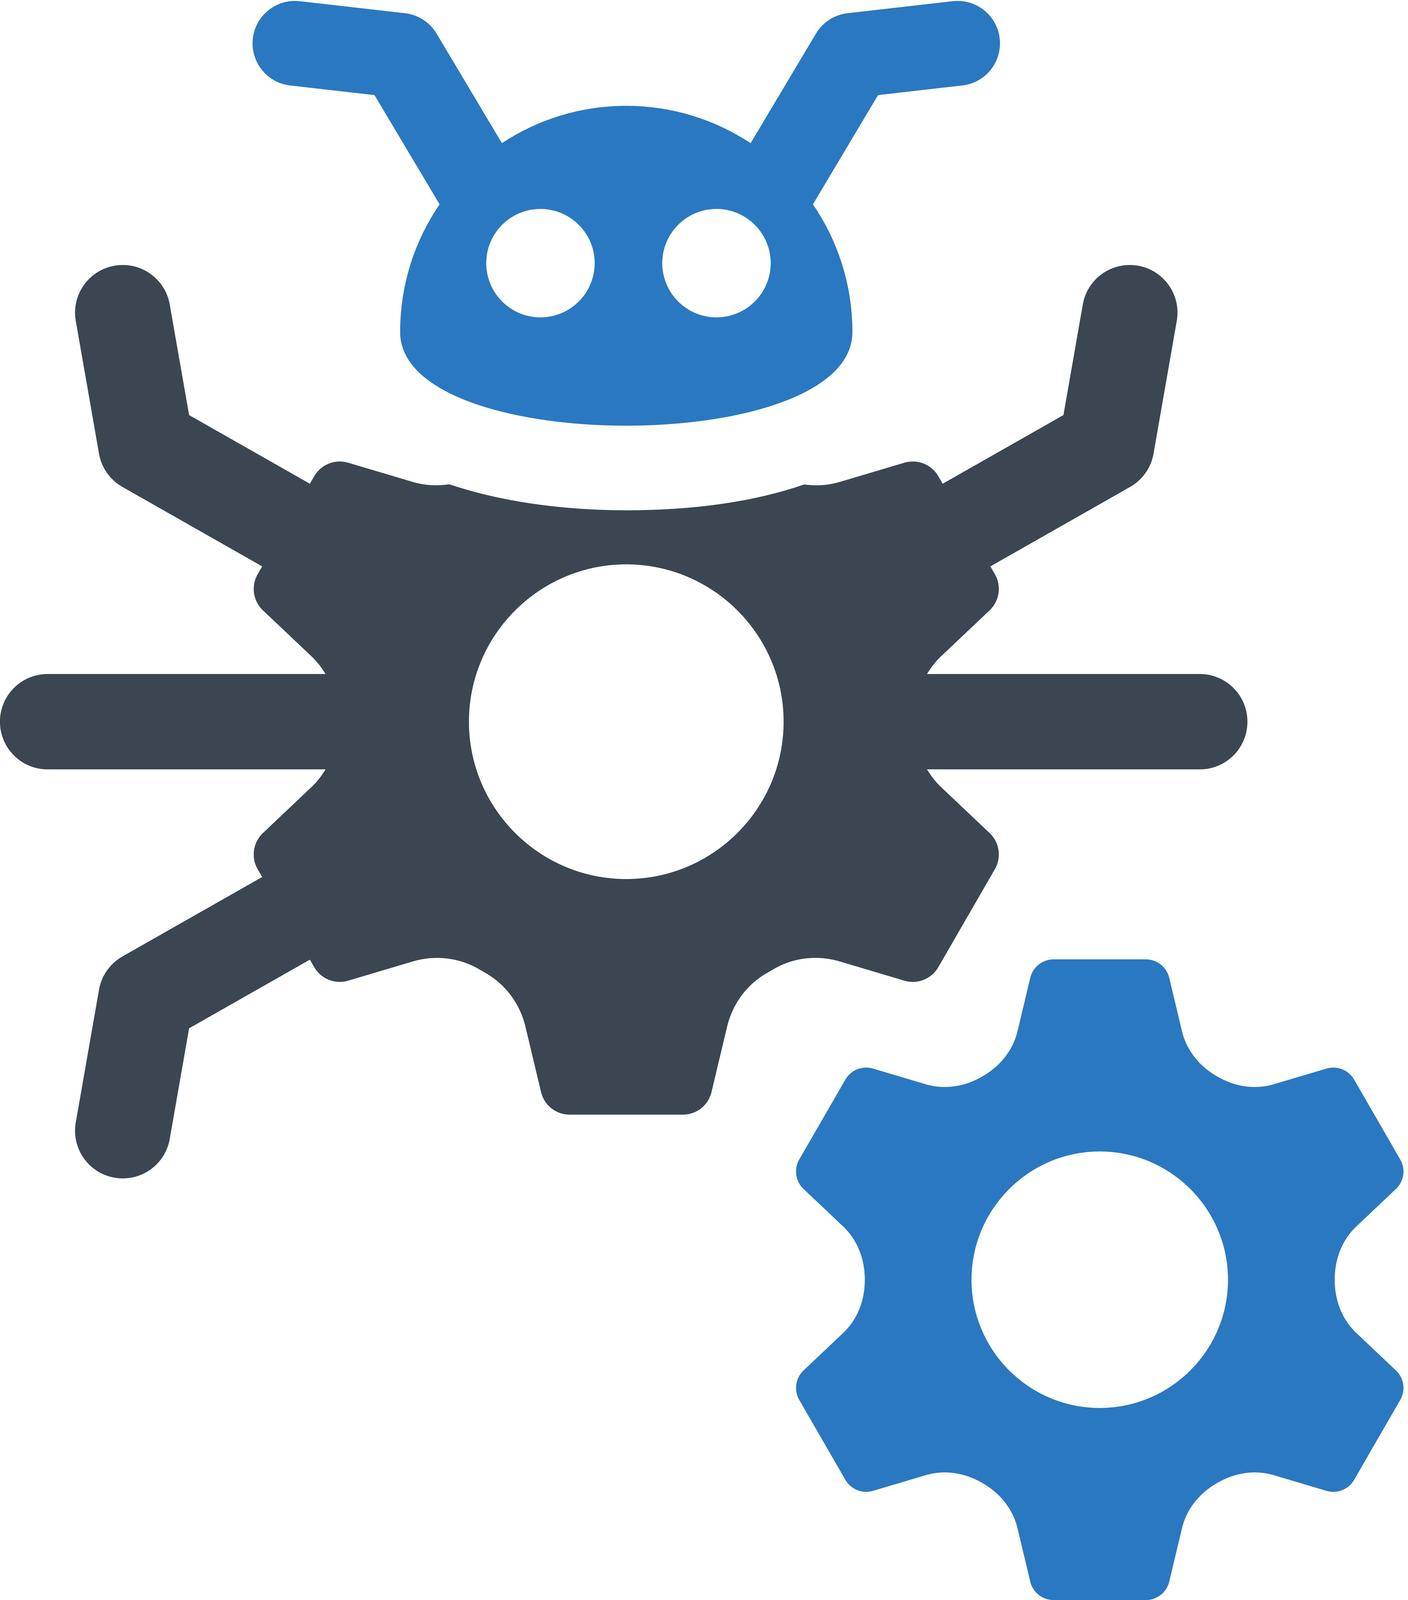 Bug fixing icon. Vector EPS file.